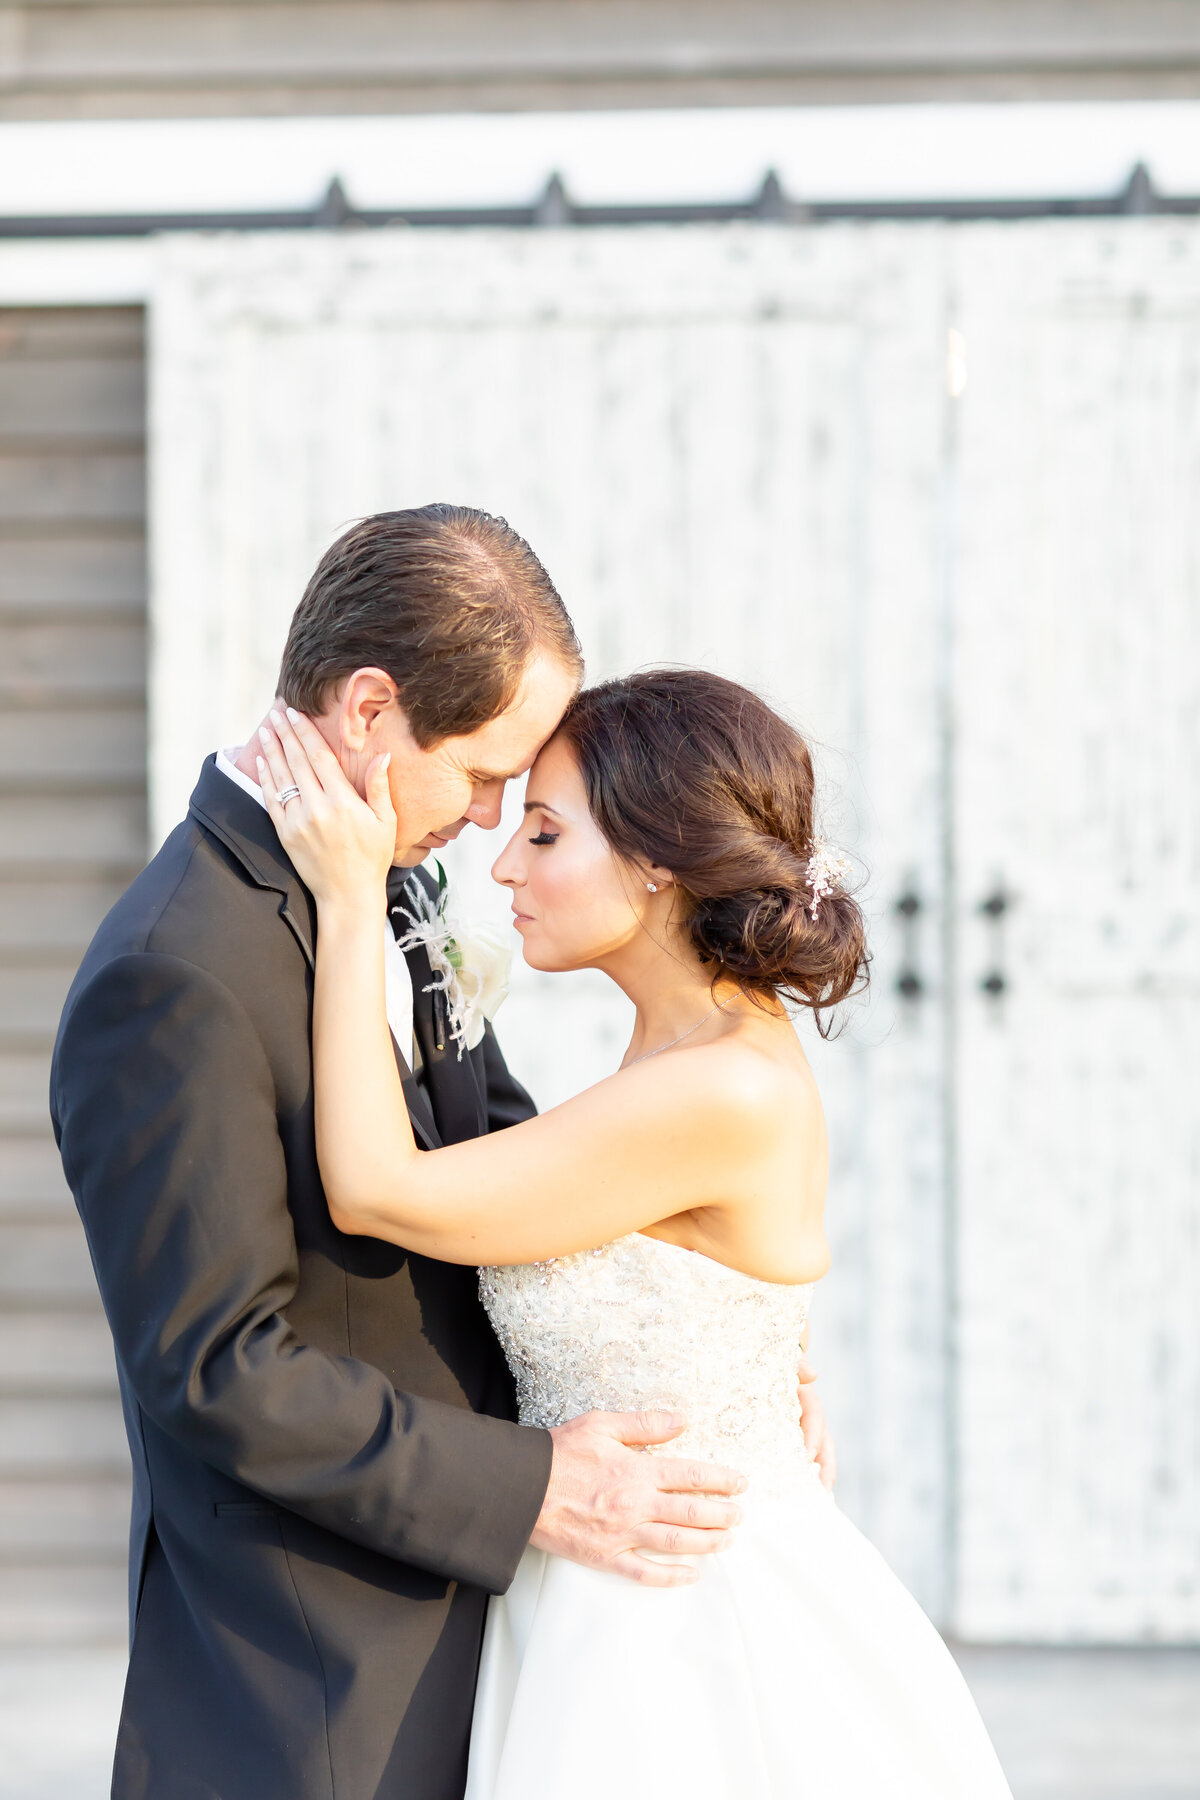 Wendee+Justin_Featherstone-Ranch_HannahCharisPhotography-195340